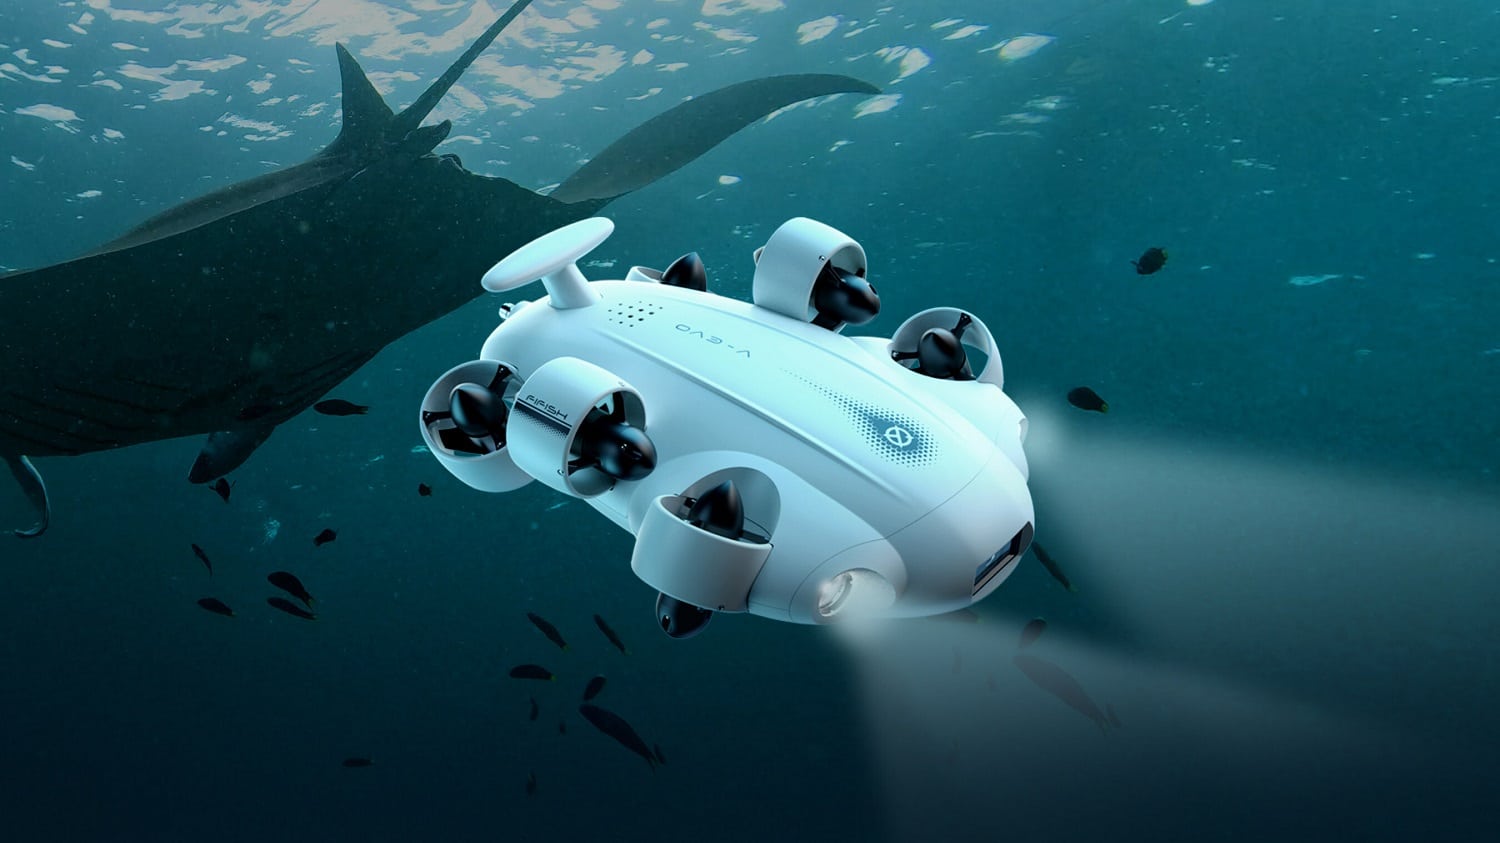 FIFISH V-EVO underwater drone can shoot 4K videos at 60FPS.